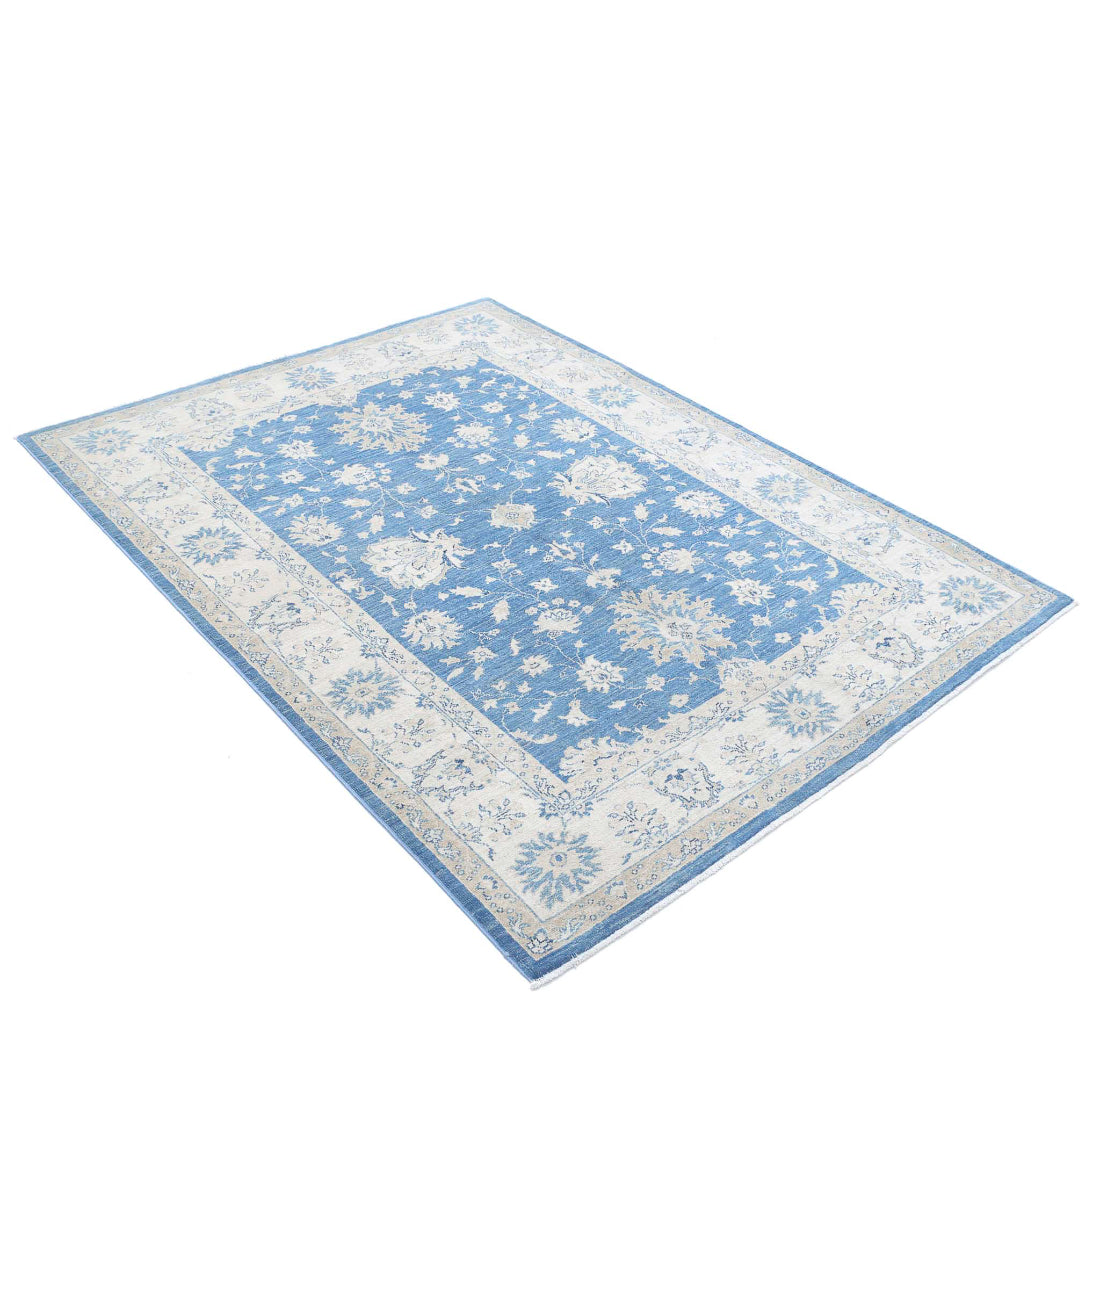 Ziegler 4'9'' X 6'4'' Hand-Knotted Wool Rug 4'9'' x 6'4'' (143 X 190) / Blue / Ivory